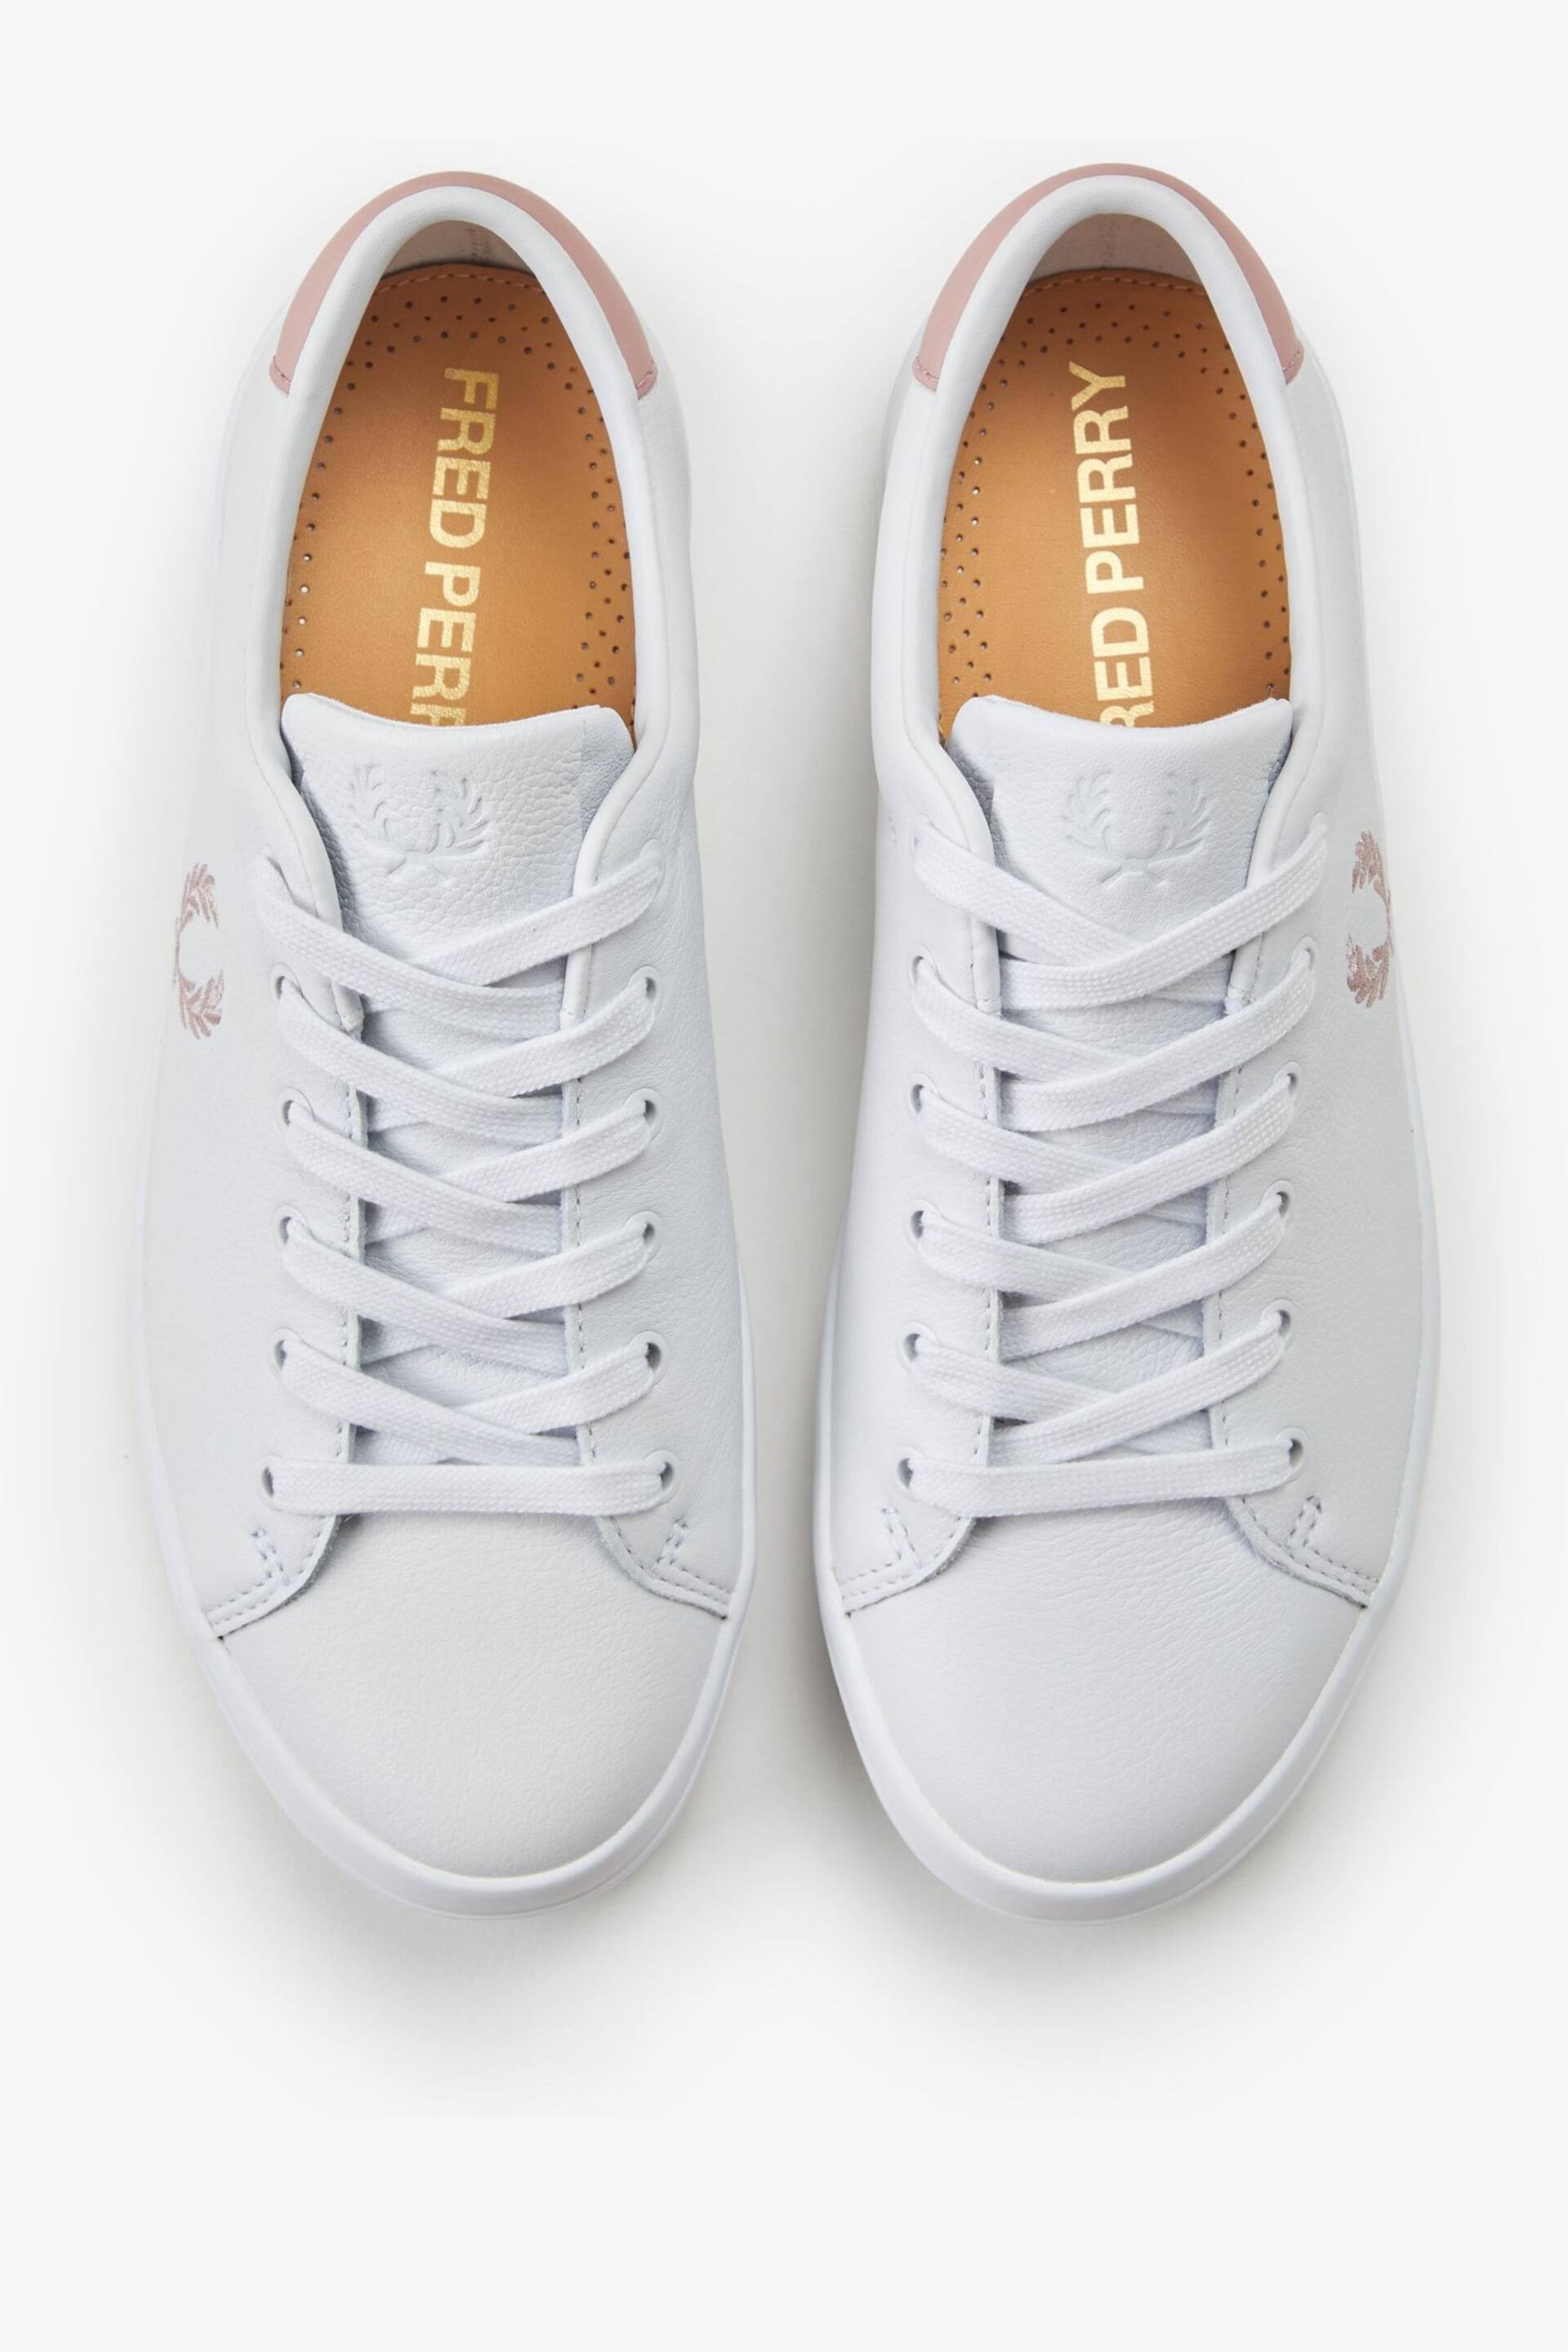 Fred Perry Womens White Lottie Leather Trainers - Image 4 of 5